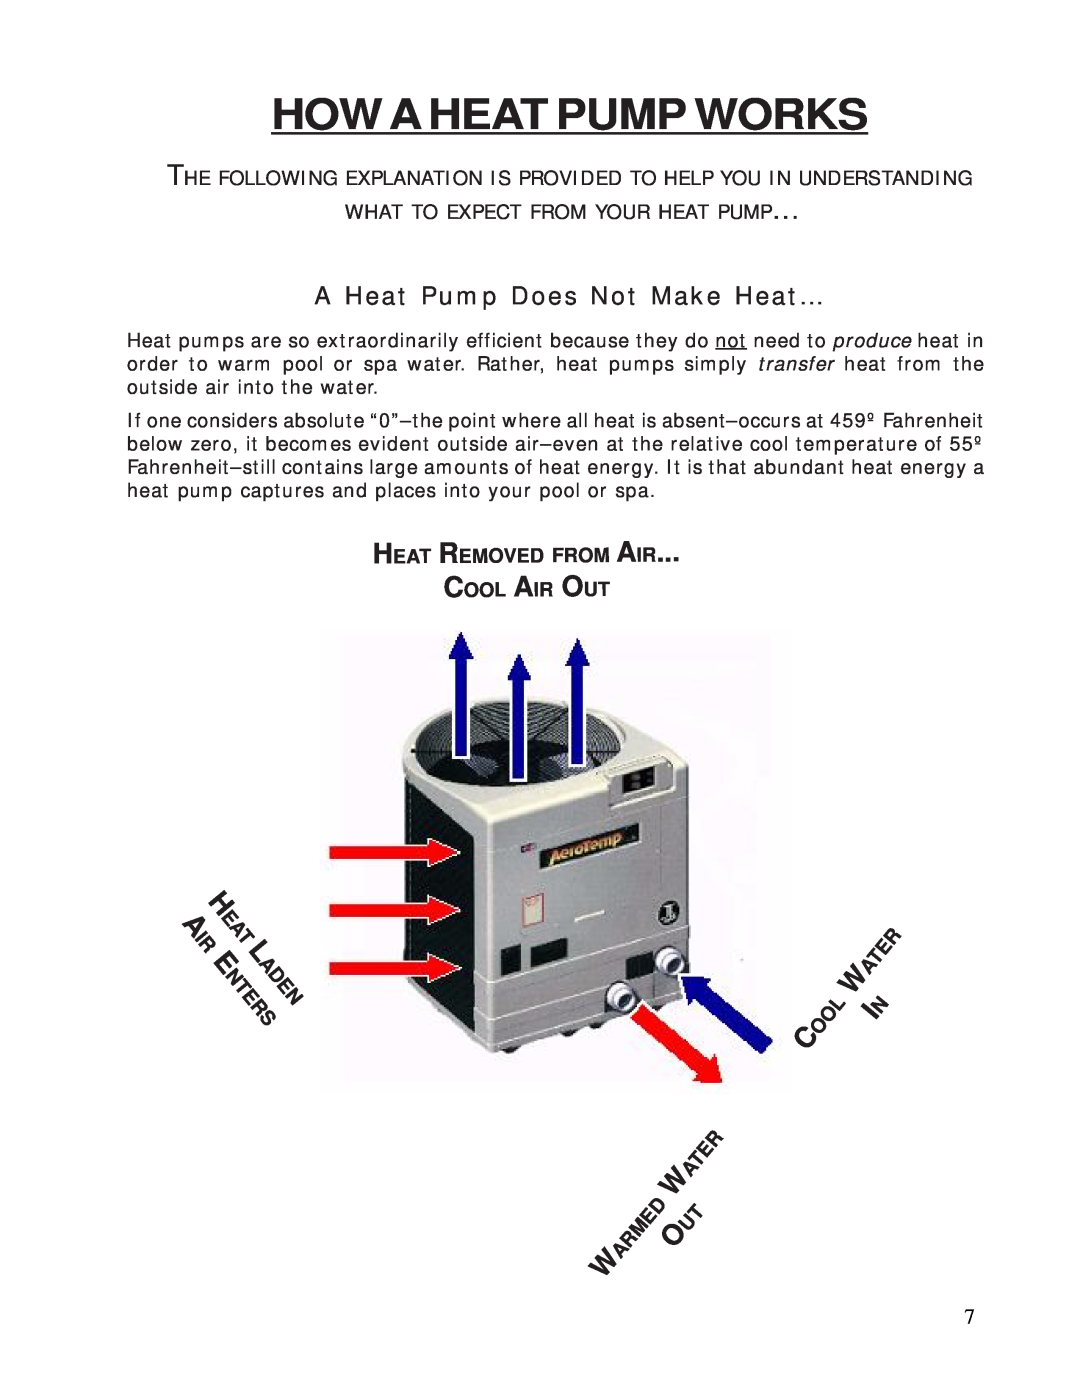 Aquacal 100 owner manual How A Heat Pump Works, A Heat Pump Does Not Make Heat…, Nters, Removed From Cool Air Out, Aden 